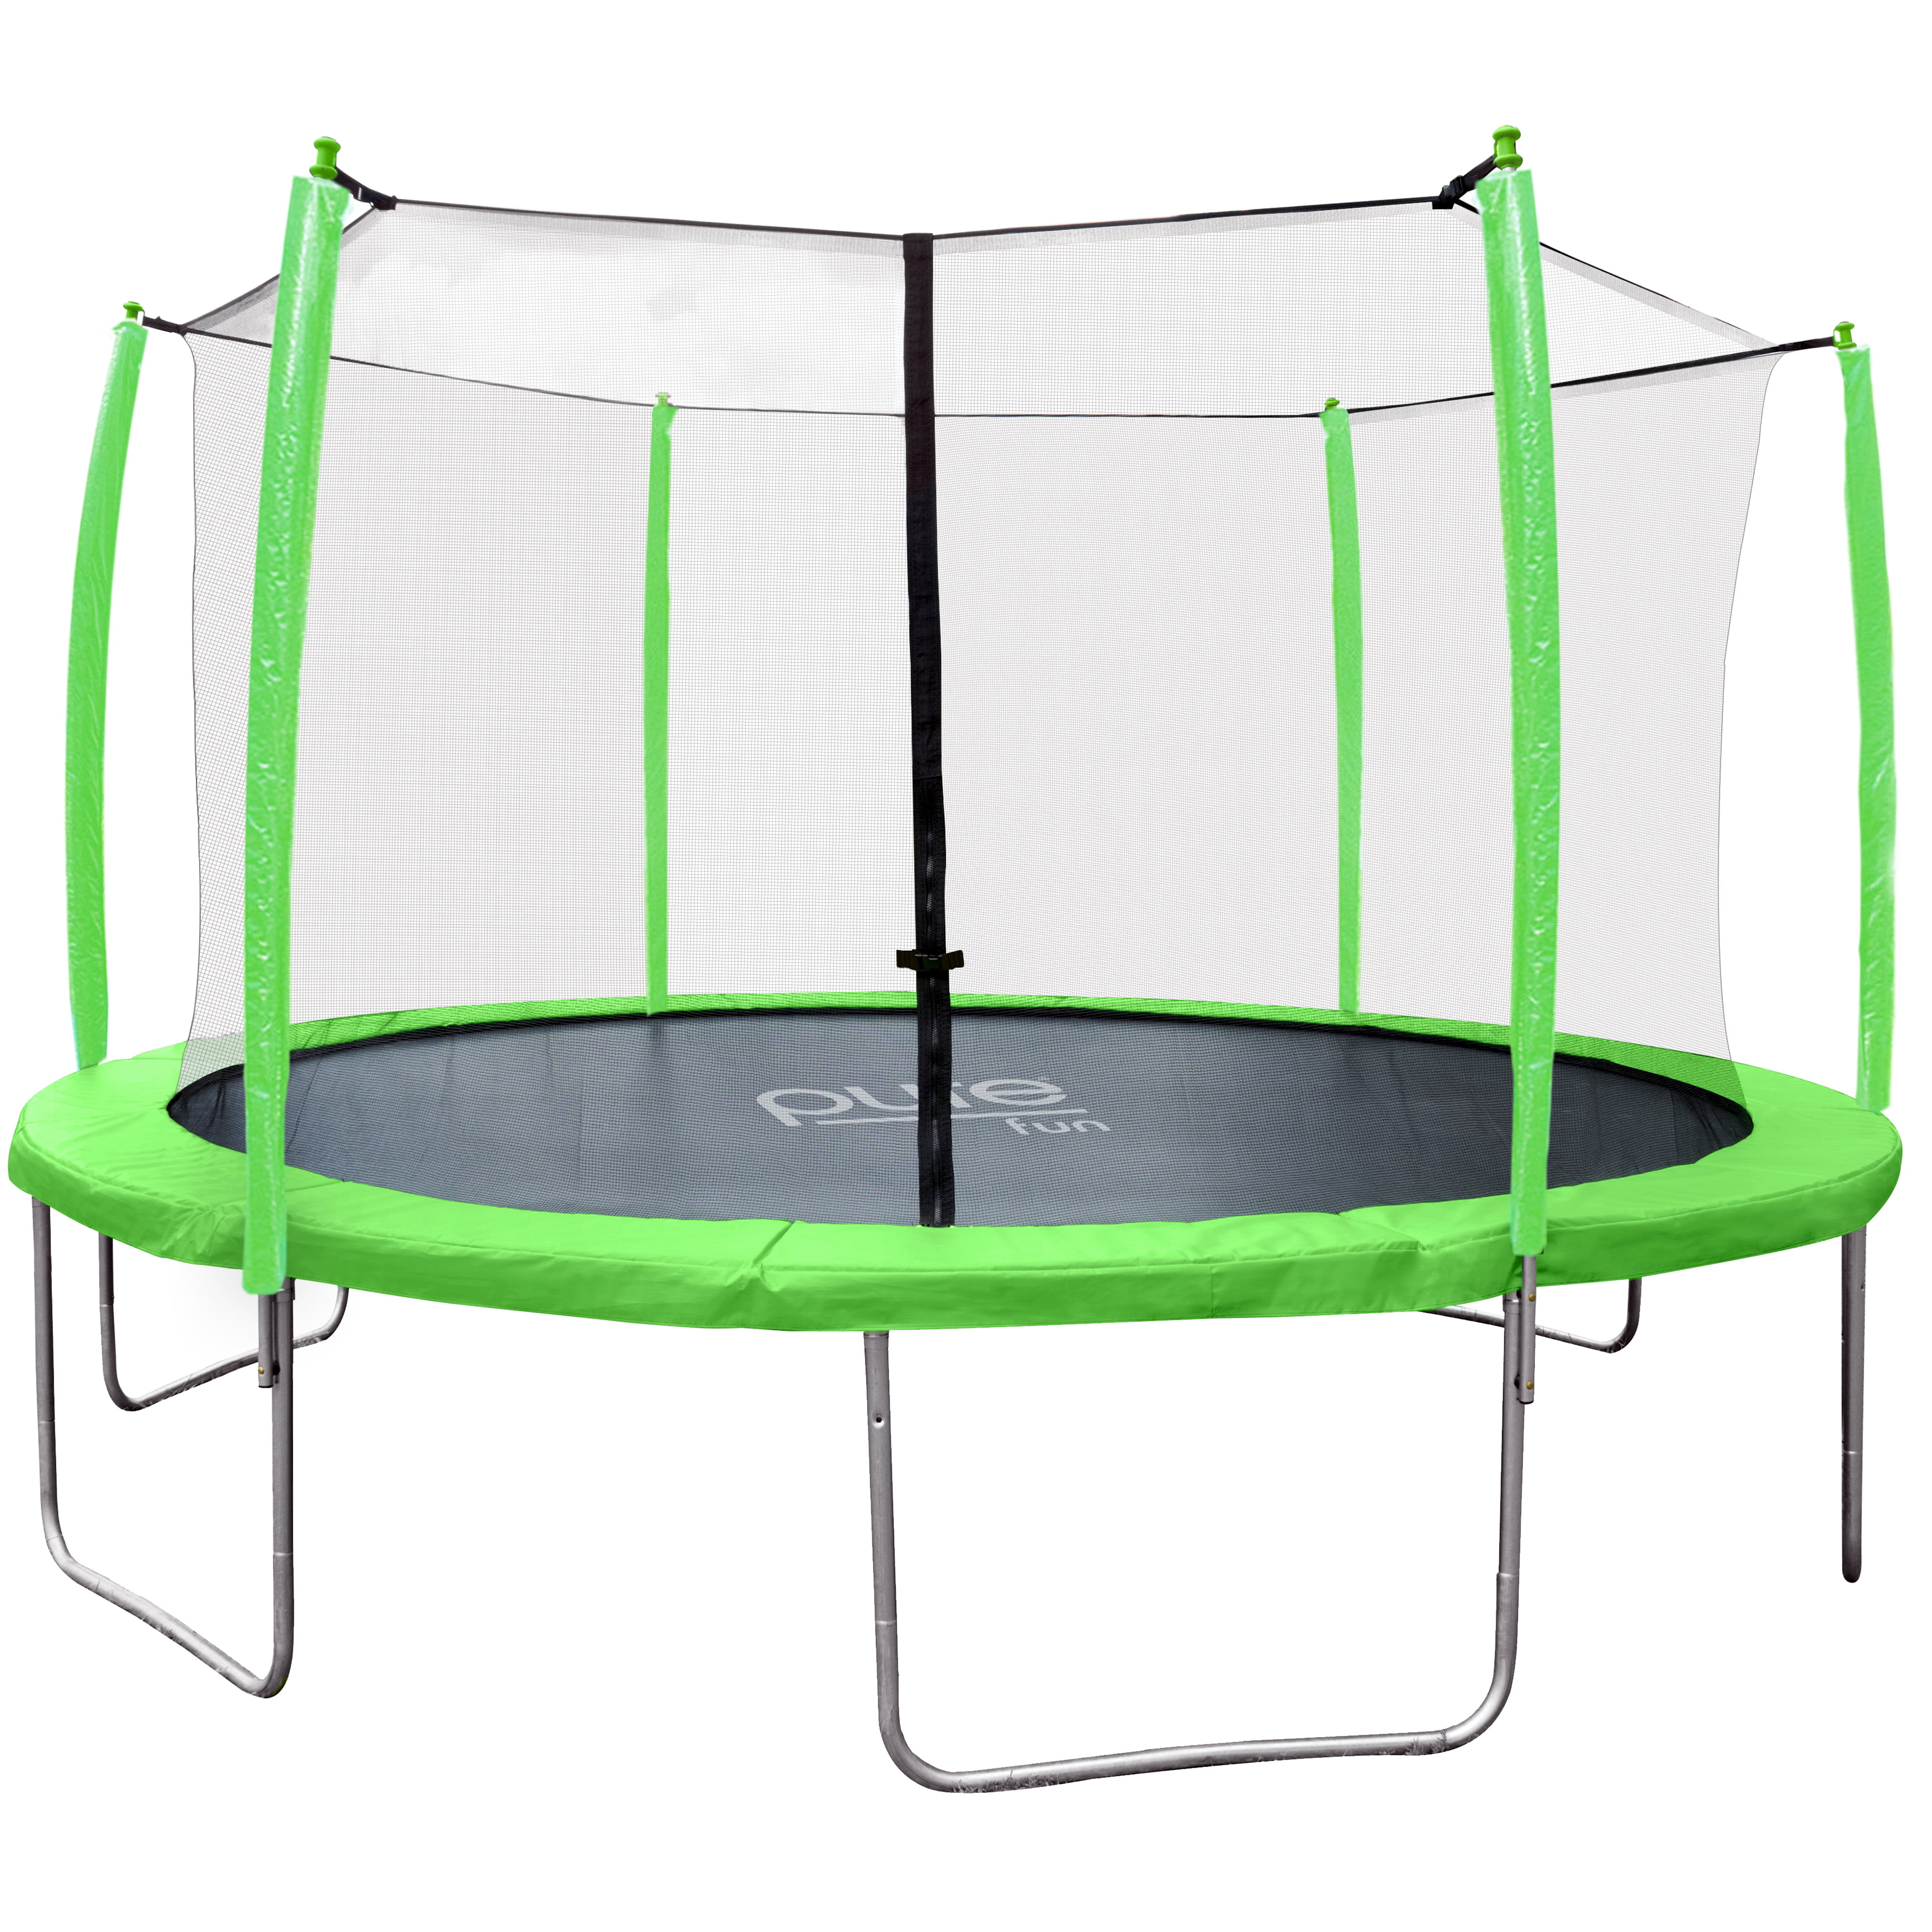 Pure Fun Supa-Bounce 15-Foot Outdoor Trampoline with Enclosure